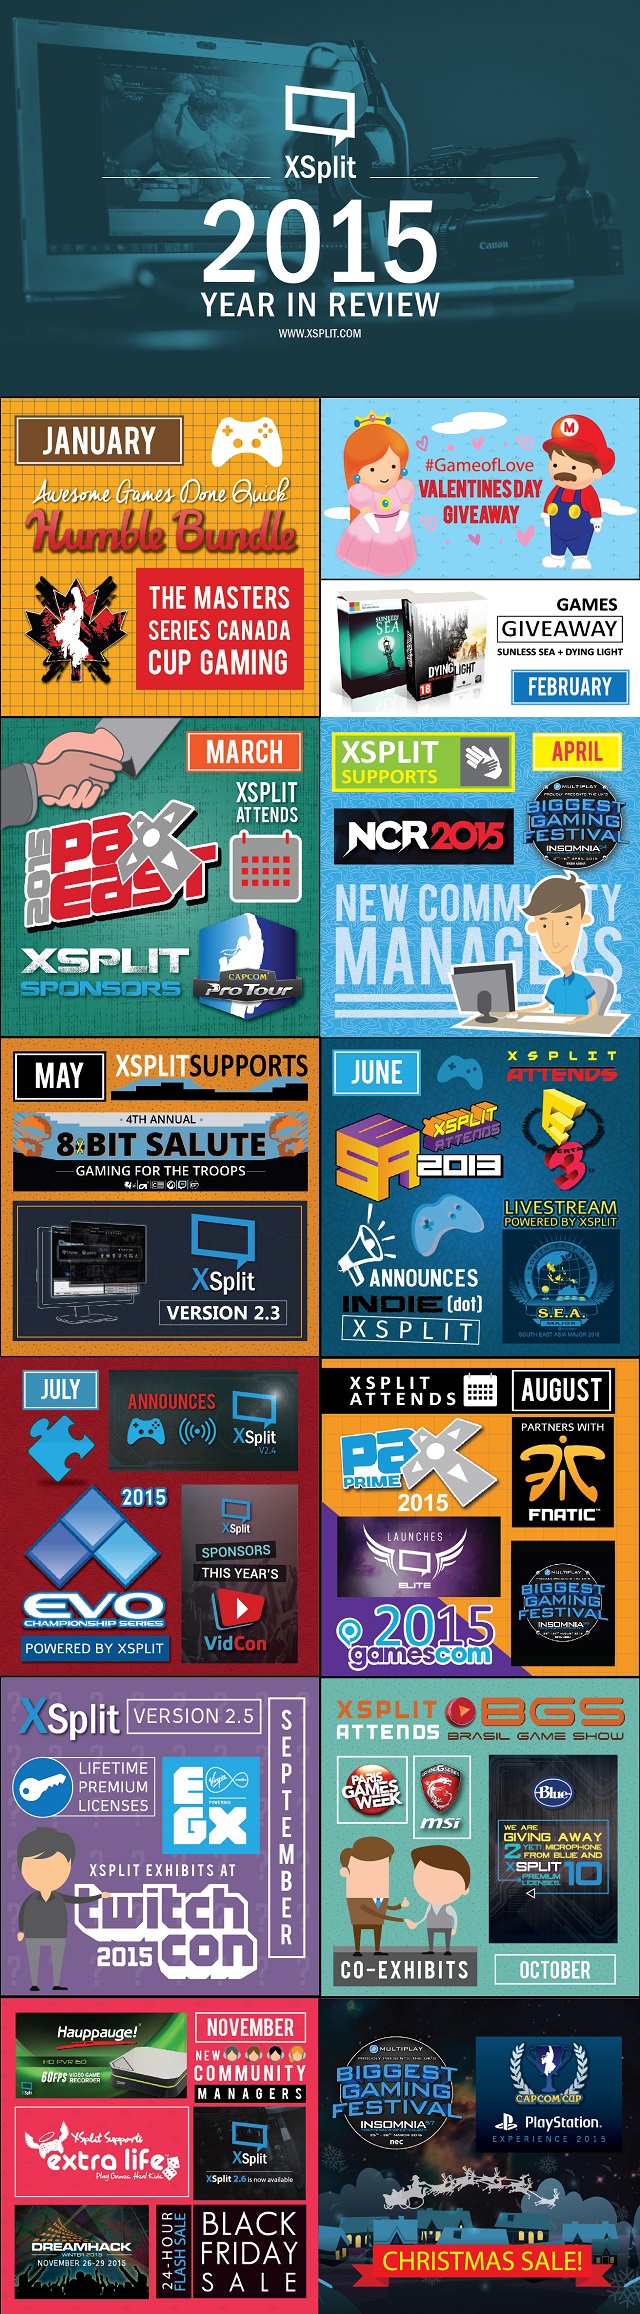 XSplit Year in Review 2015 Infographic